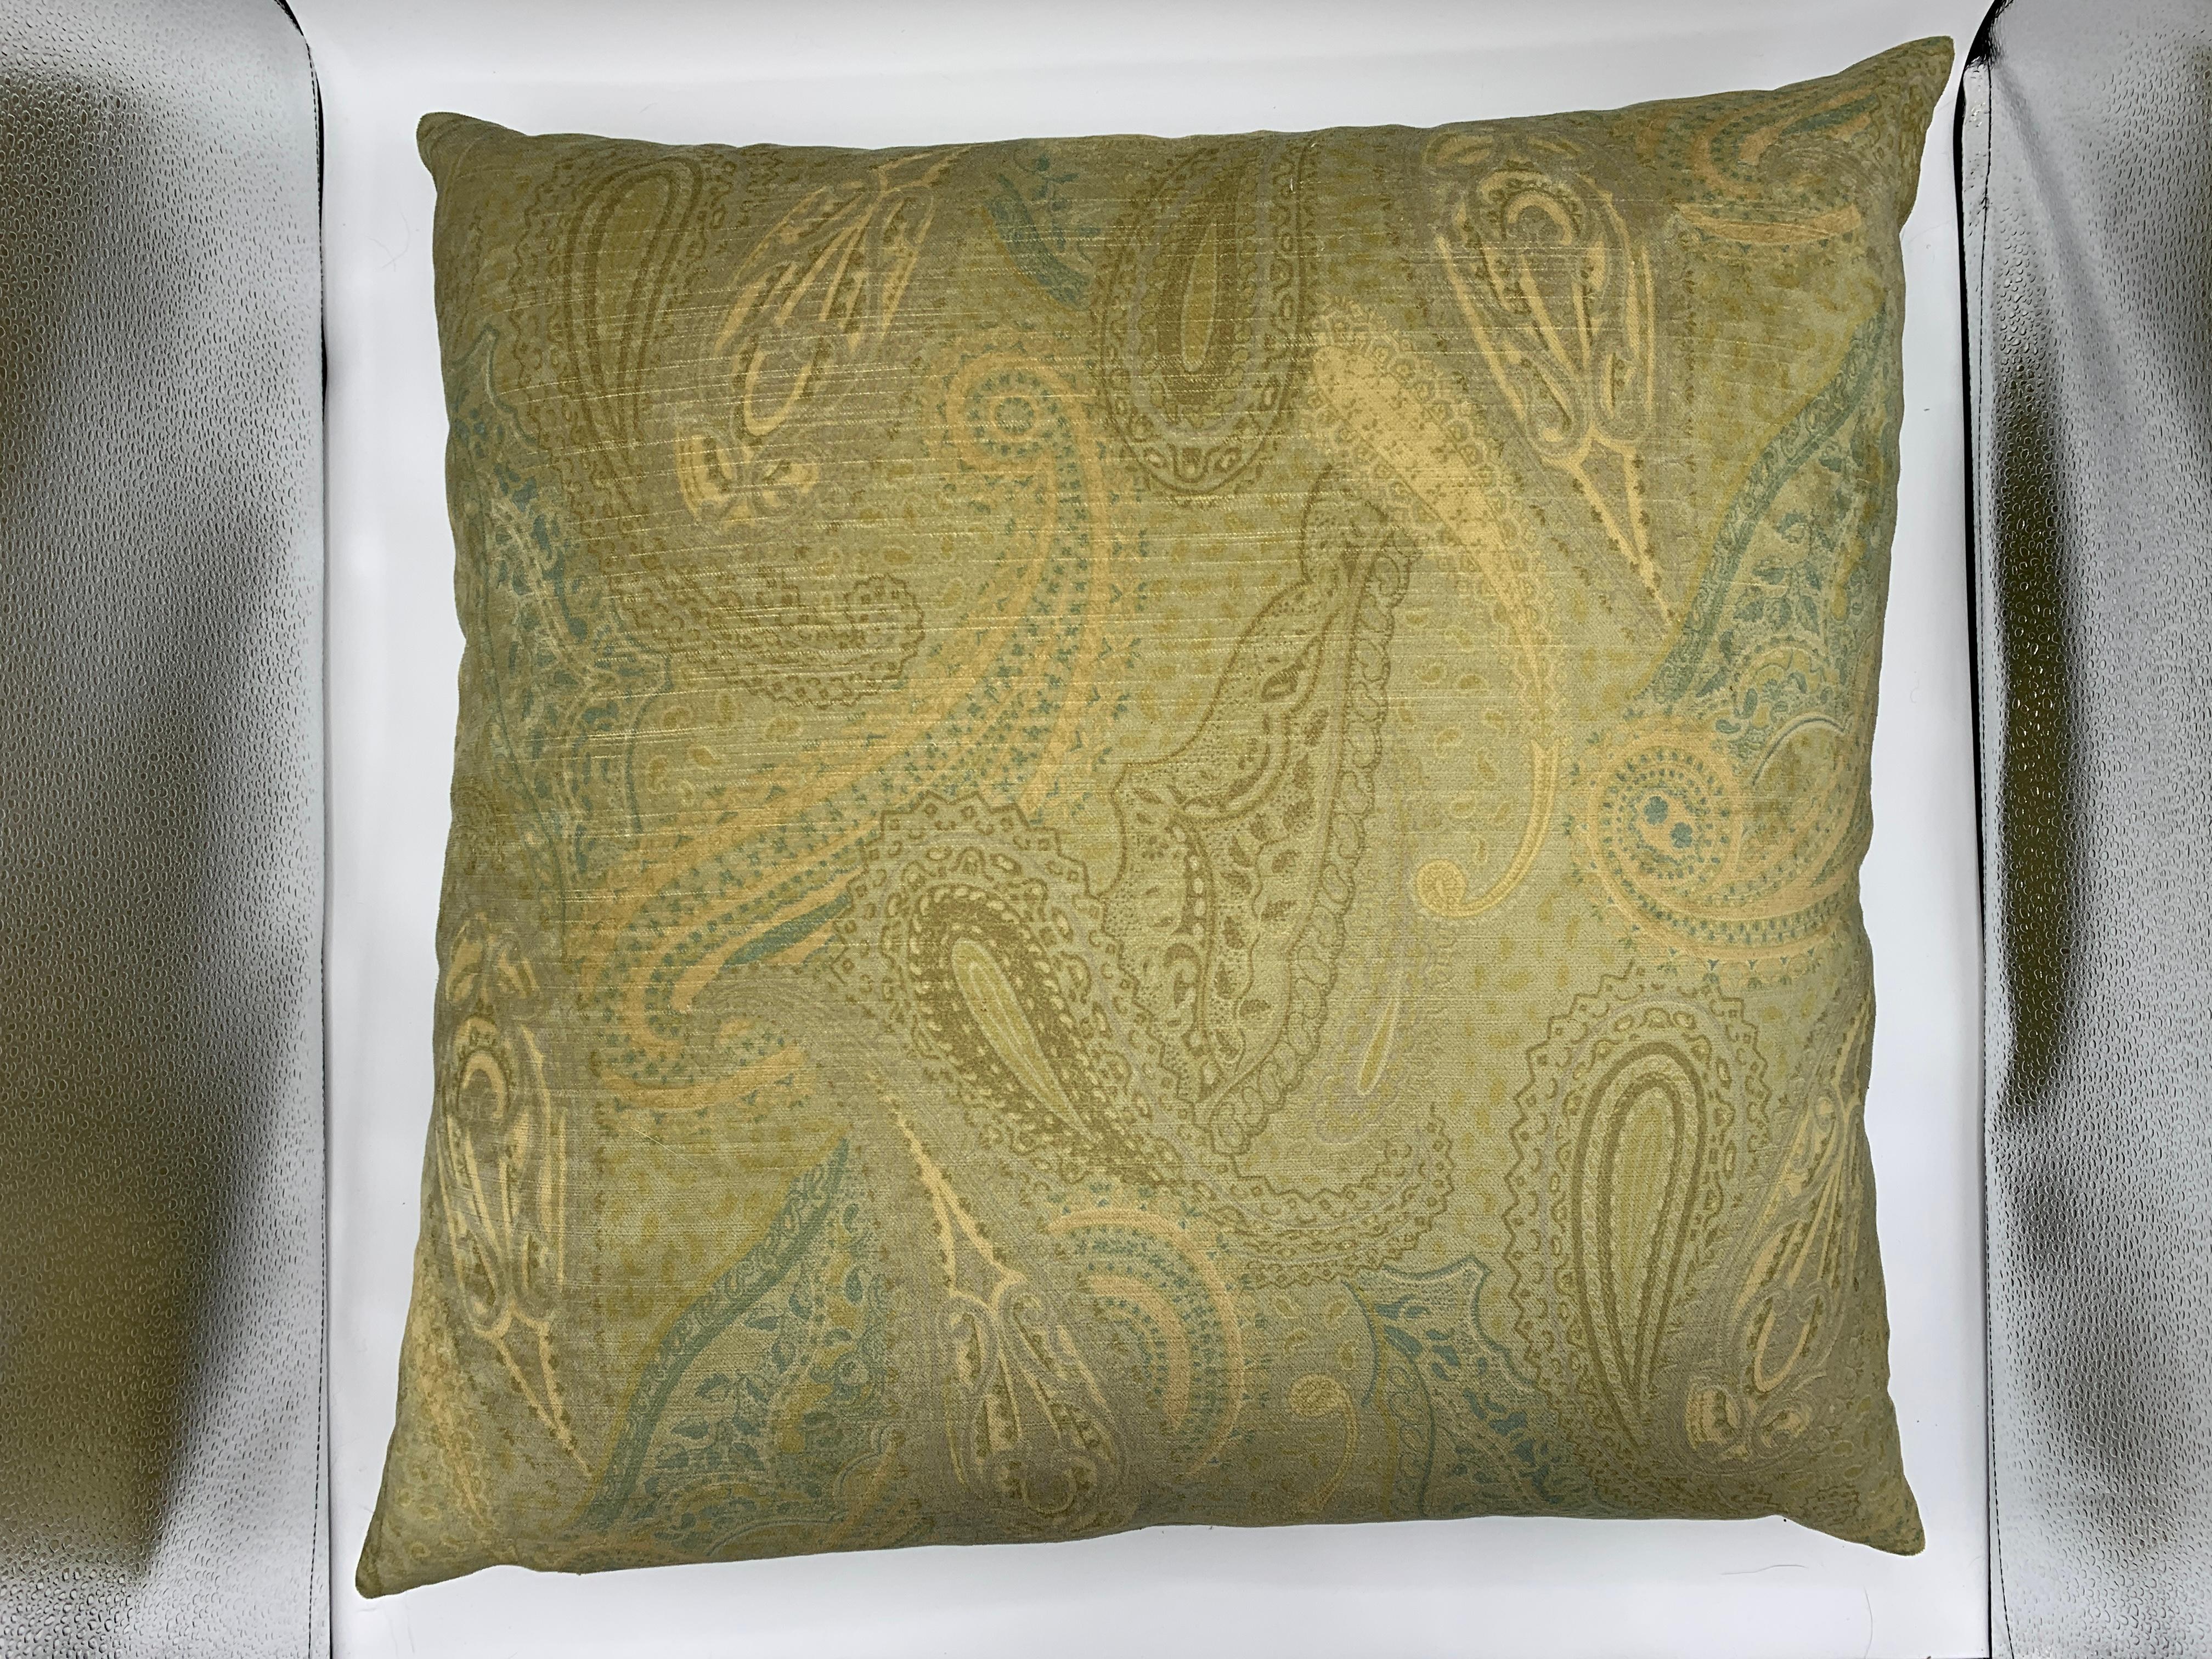 Listed is a stunning, pair of oversized, velvet pillows. The pair has a beautiful, tone on tone green paisley motif allover. Down insert and zipper closure in each. Euro sized, 28in x 28in each.